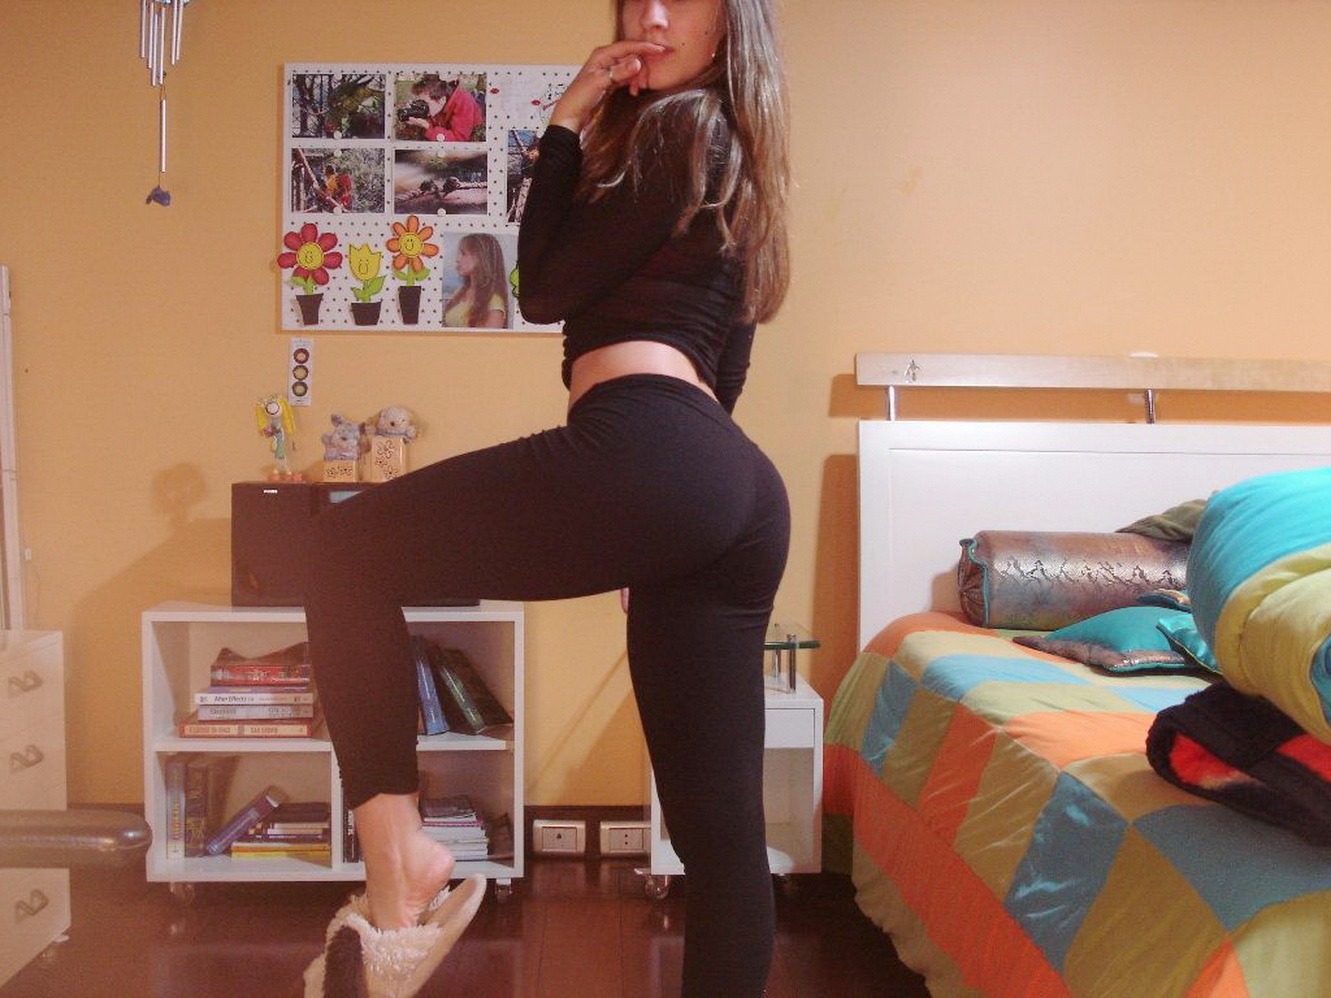 Amateur with AMAZING ASS!